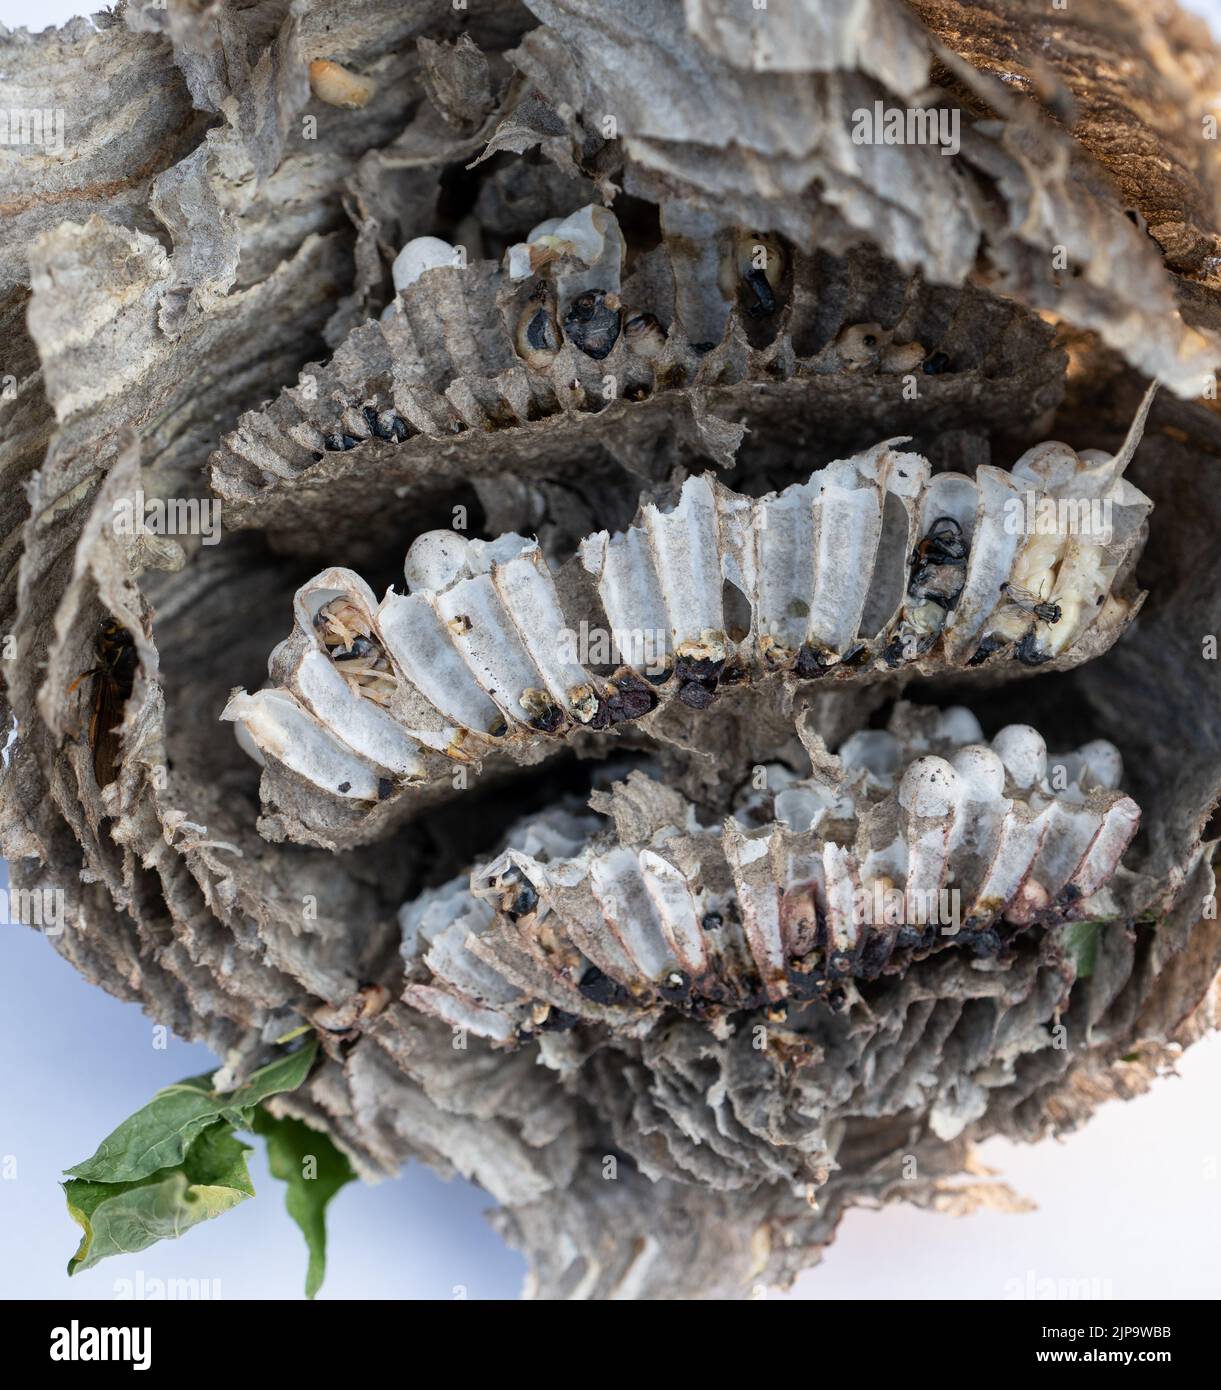 Wasp nest section profile view Stock Photo